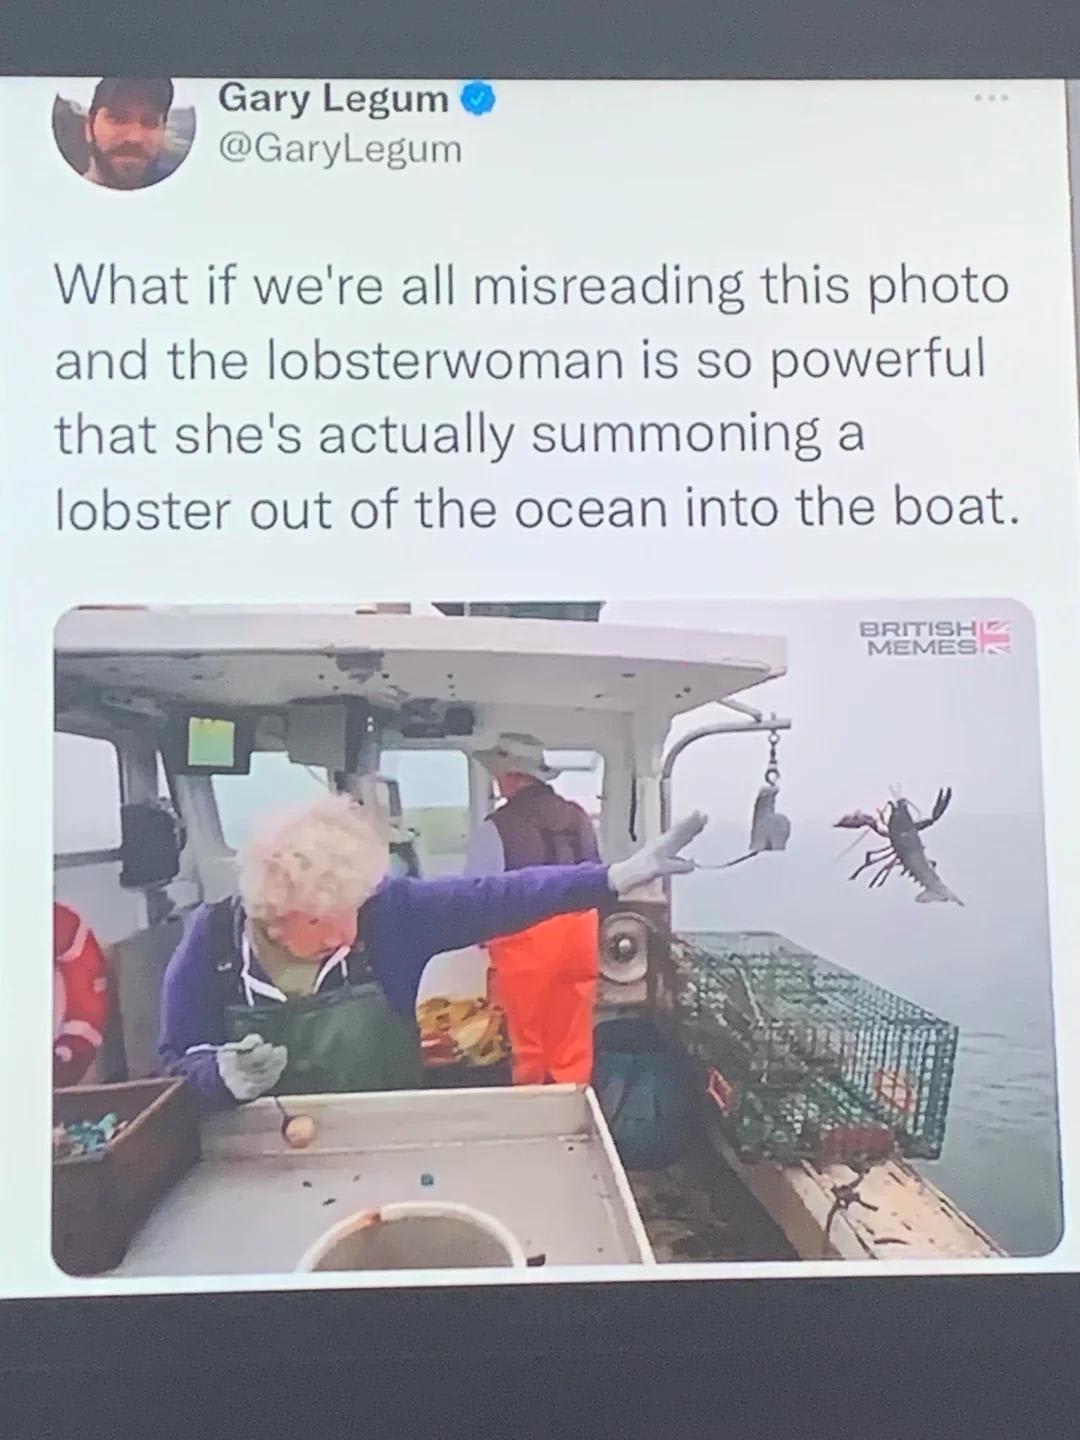 "Summoning a lobster out of the ocean"